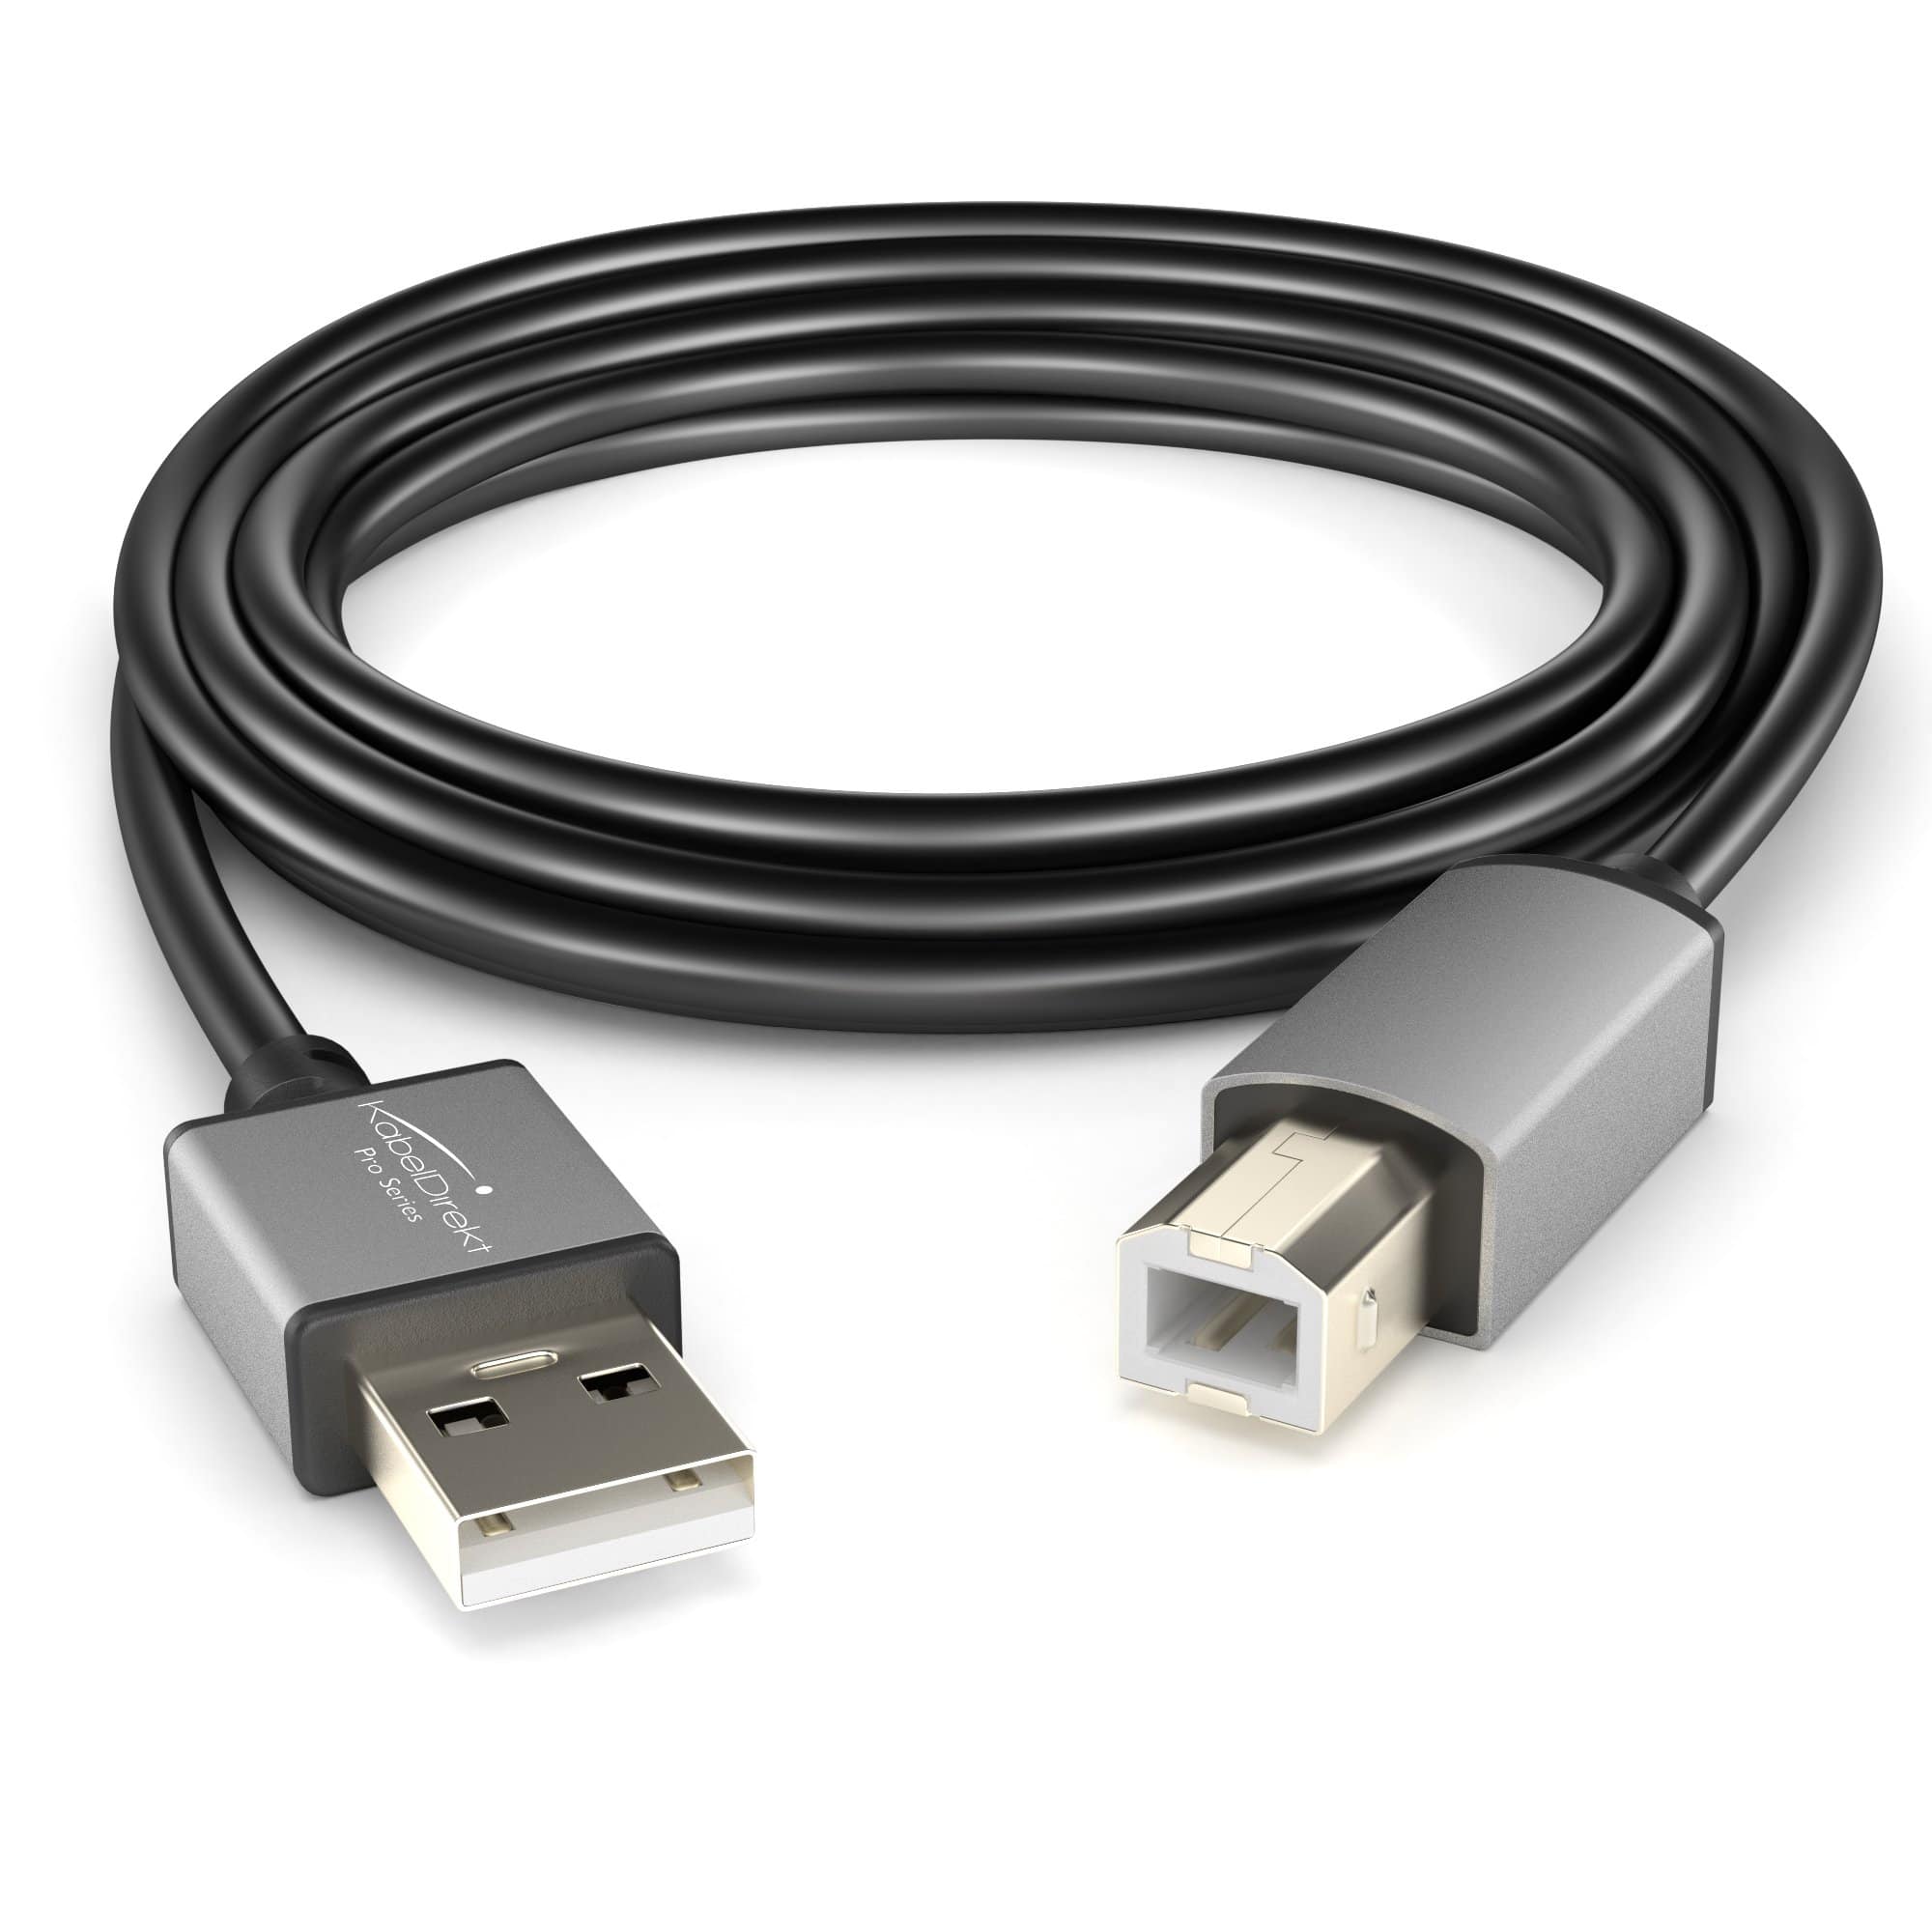 Belkin 16ft USB A/B Device Cable - USB cable - USB to USB Type B - 16 ft -  F3U133B16 - USB Cables 